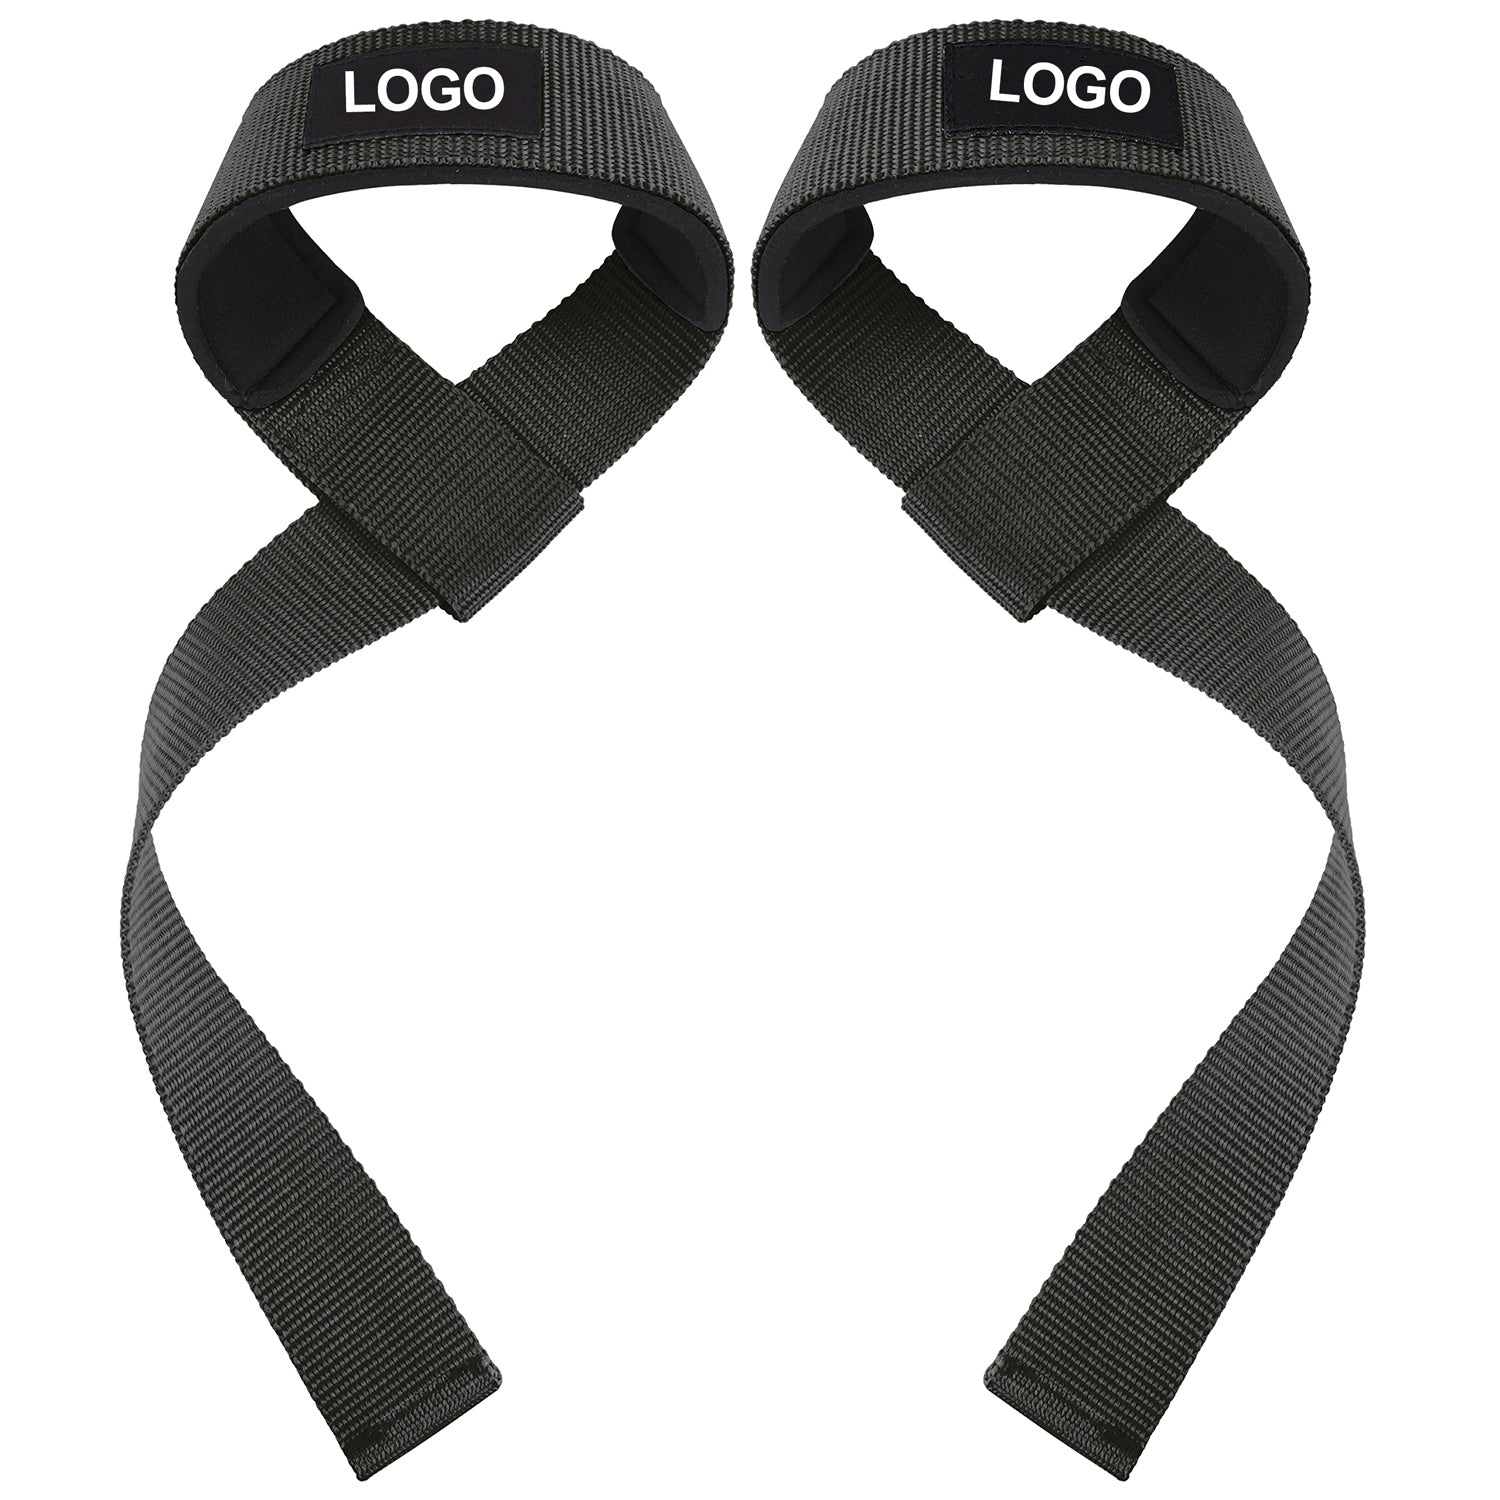 Weightlifting Gym Weight Lifting Straps Fitness Training Wrist